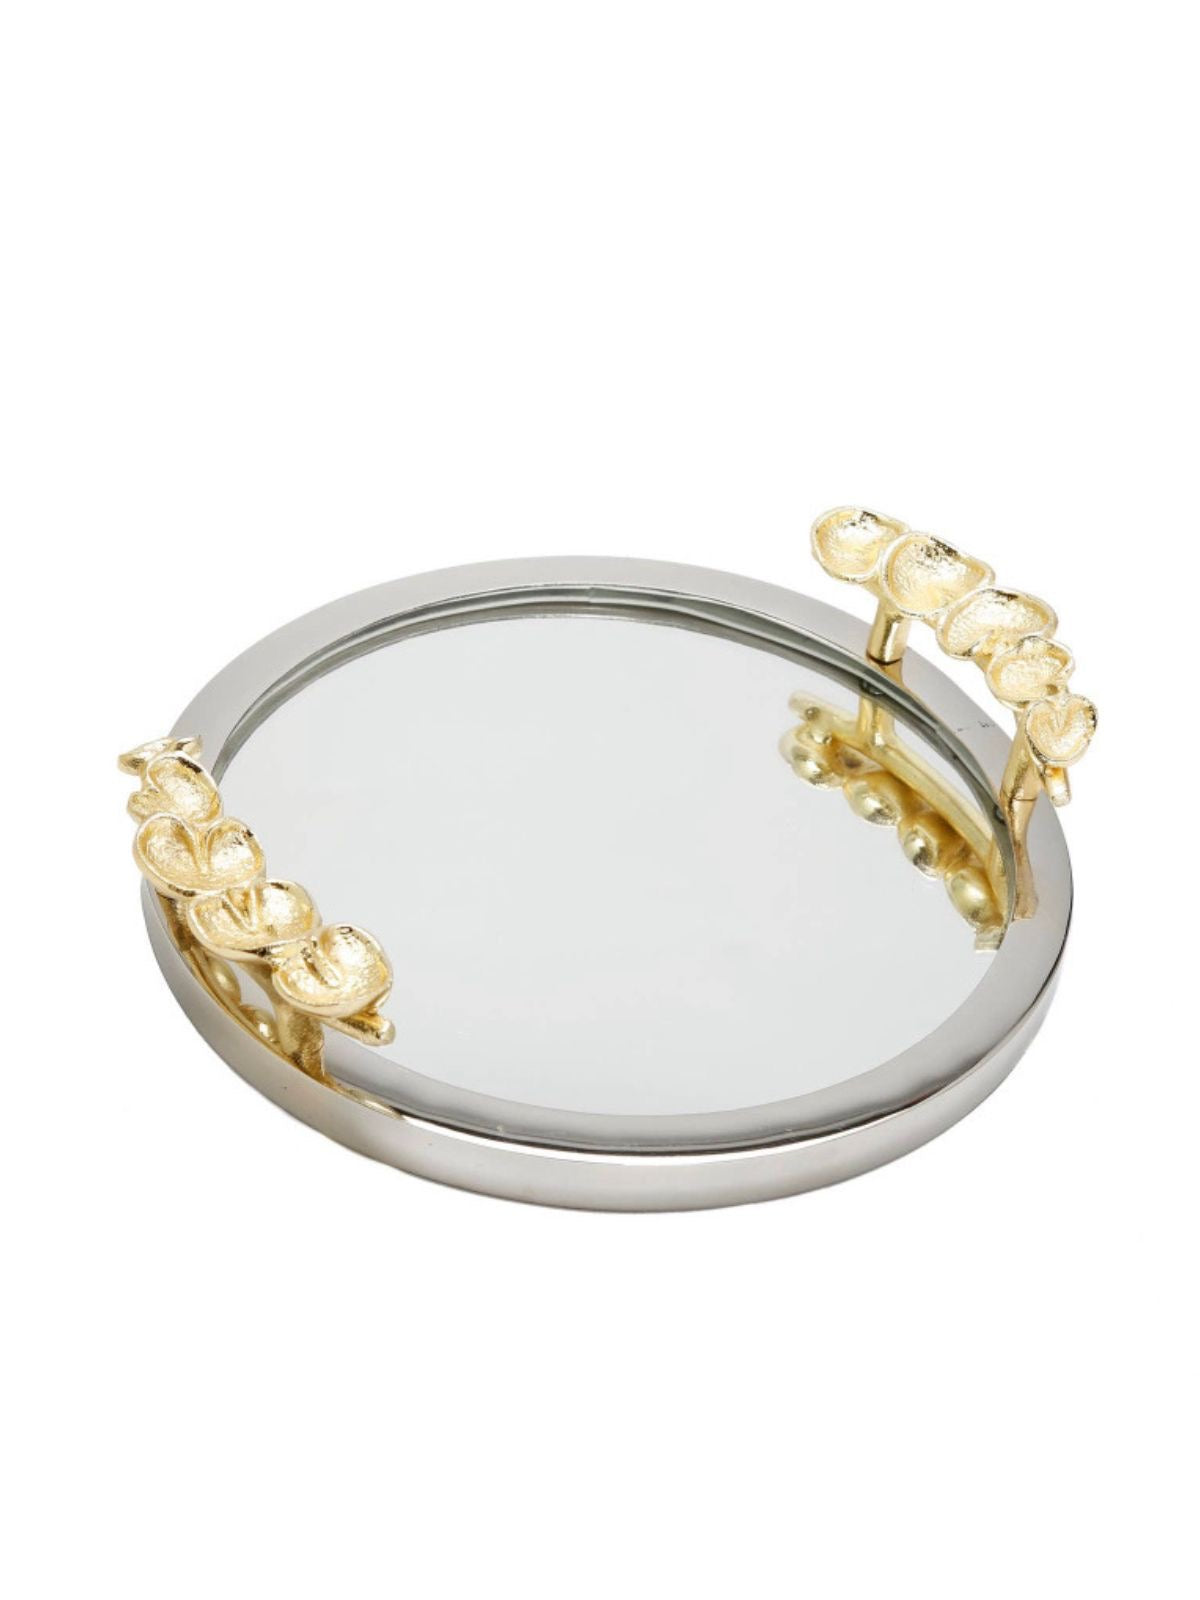 12D round silver mirrored tray with gold leaf handles. Sold by KYA Home Decor.